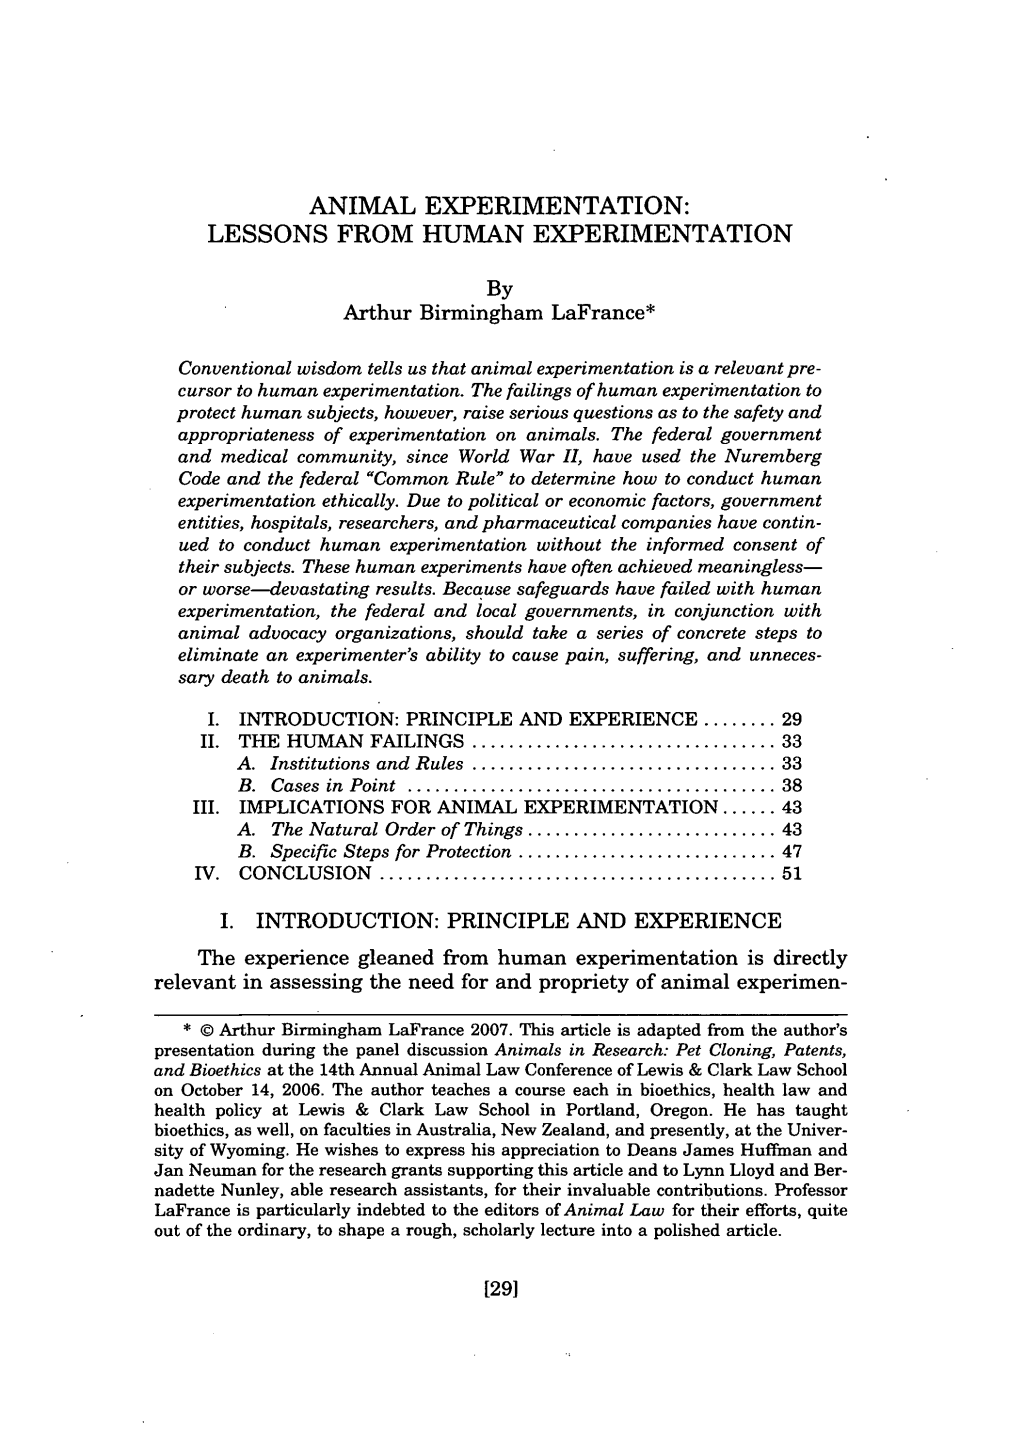 Animal Experimentation: Lessons from Human Experimentation